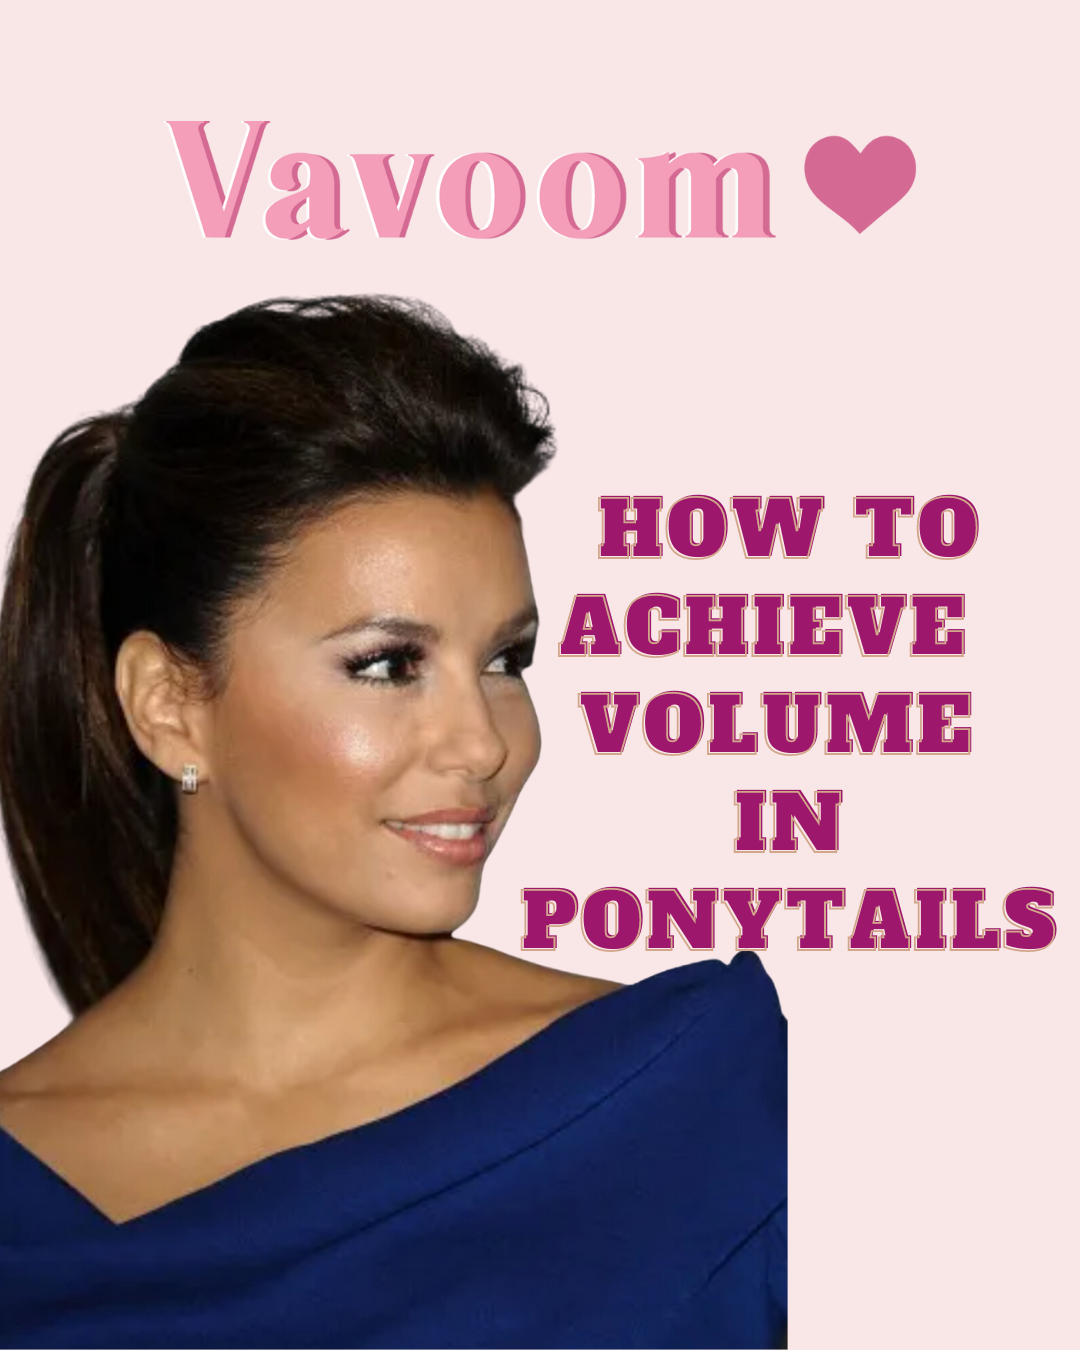 How to Achieve Breathtaking Volume in Ponytails